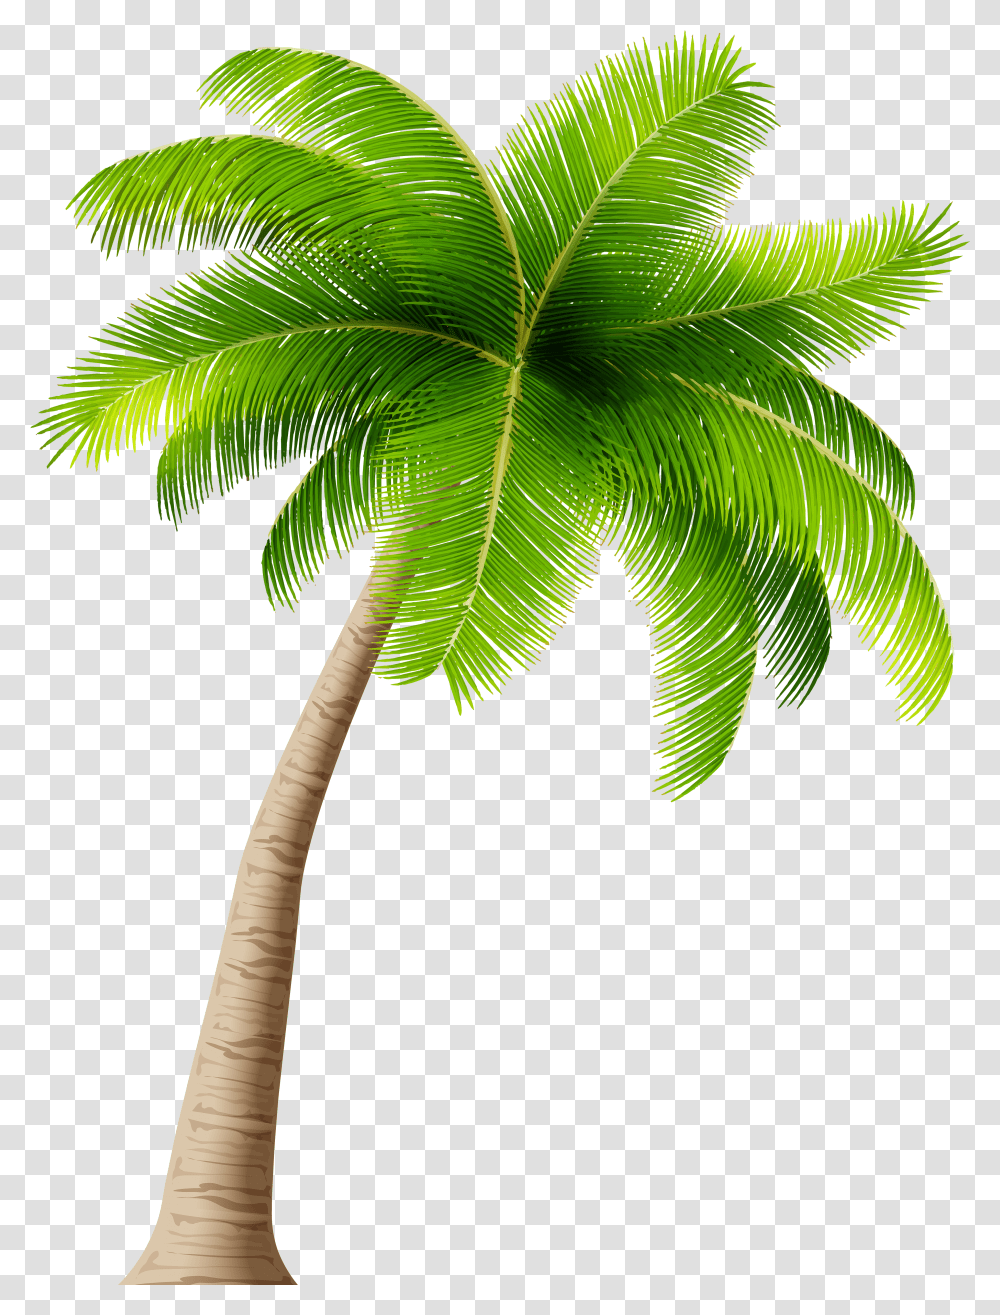 Palm Tree Clipart Image Background Coconut Tree Clipart Transparent Png